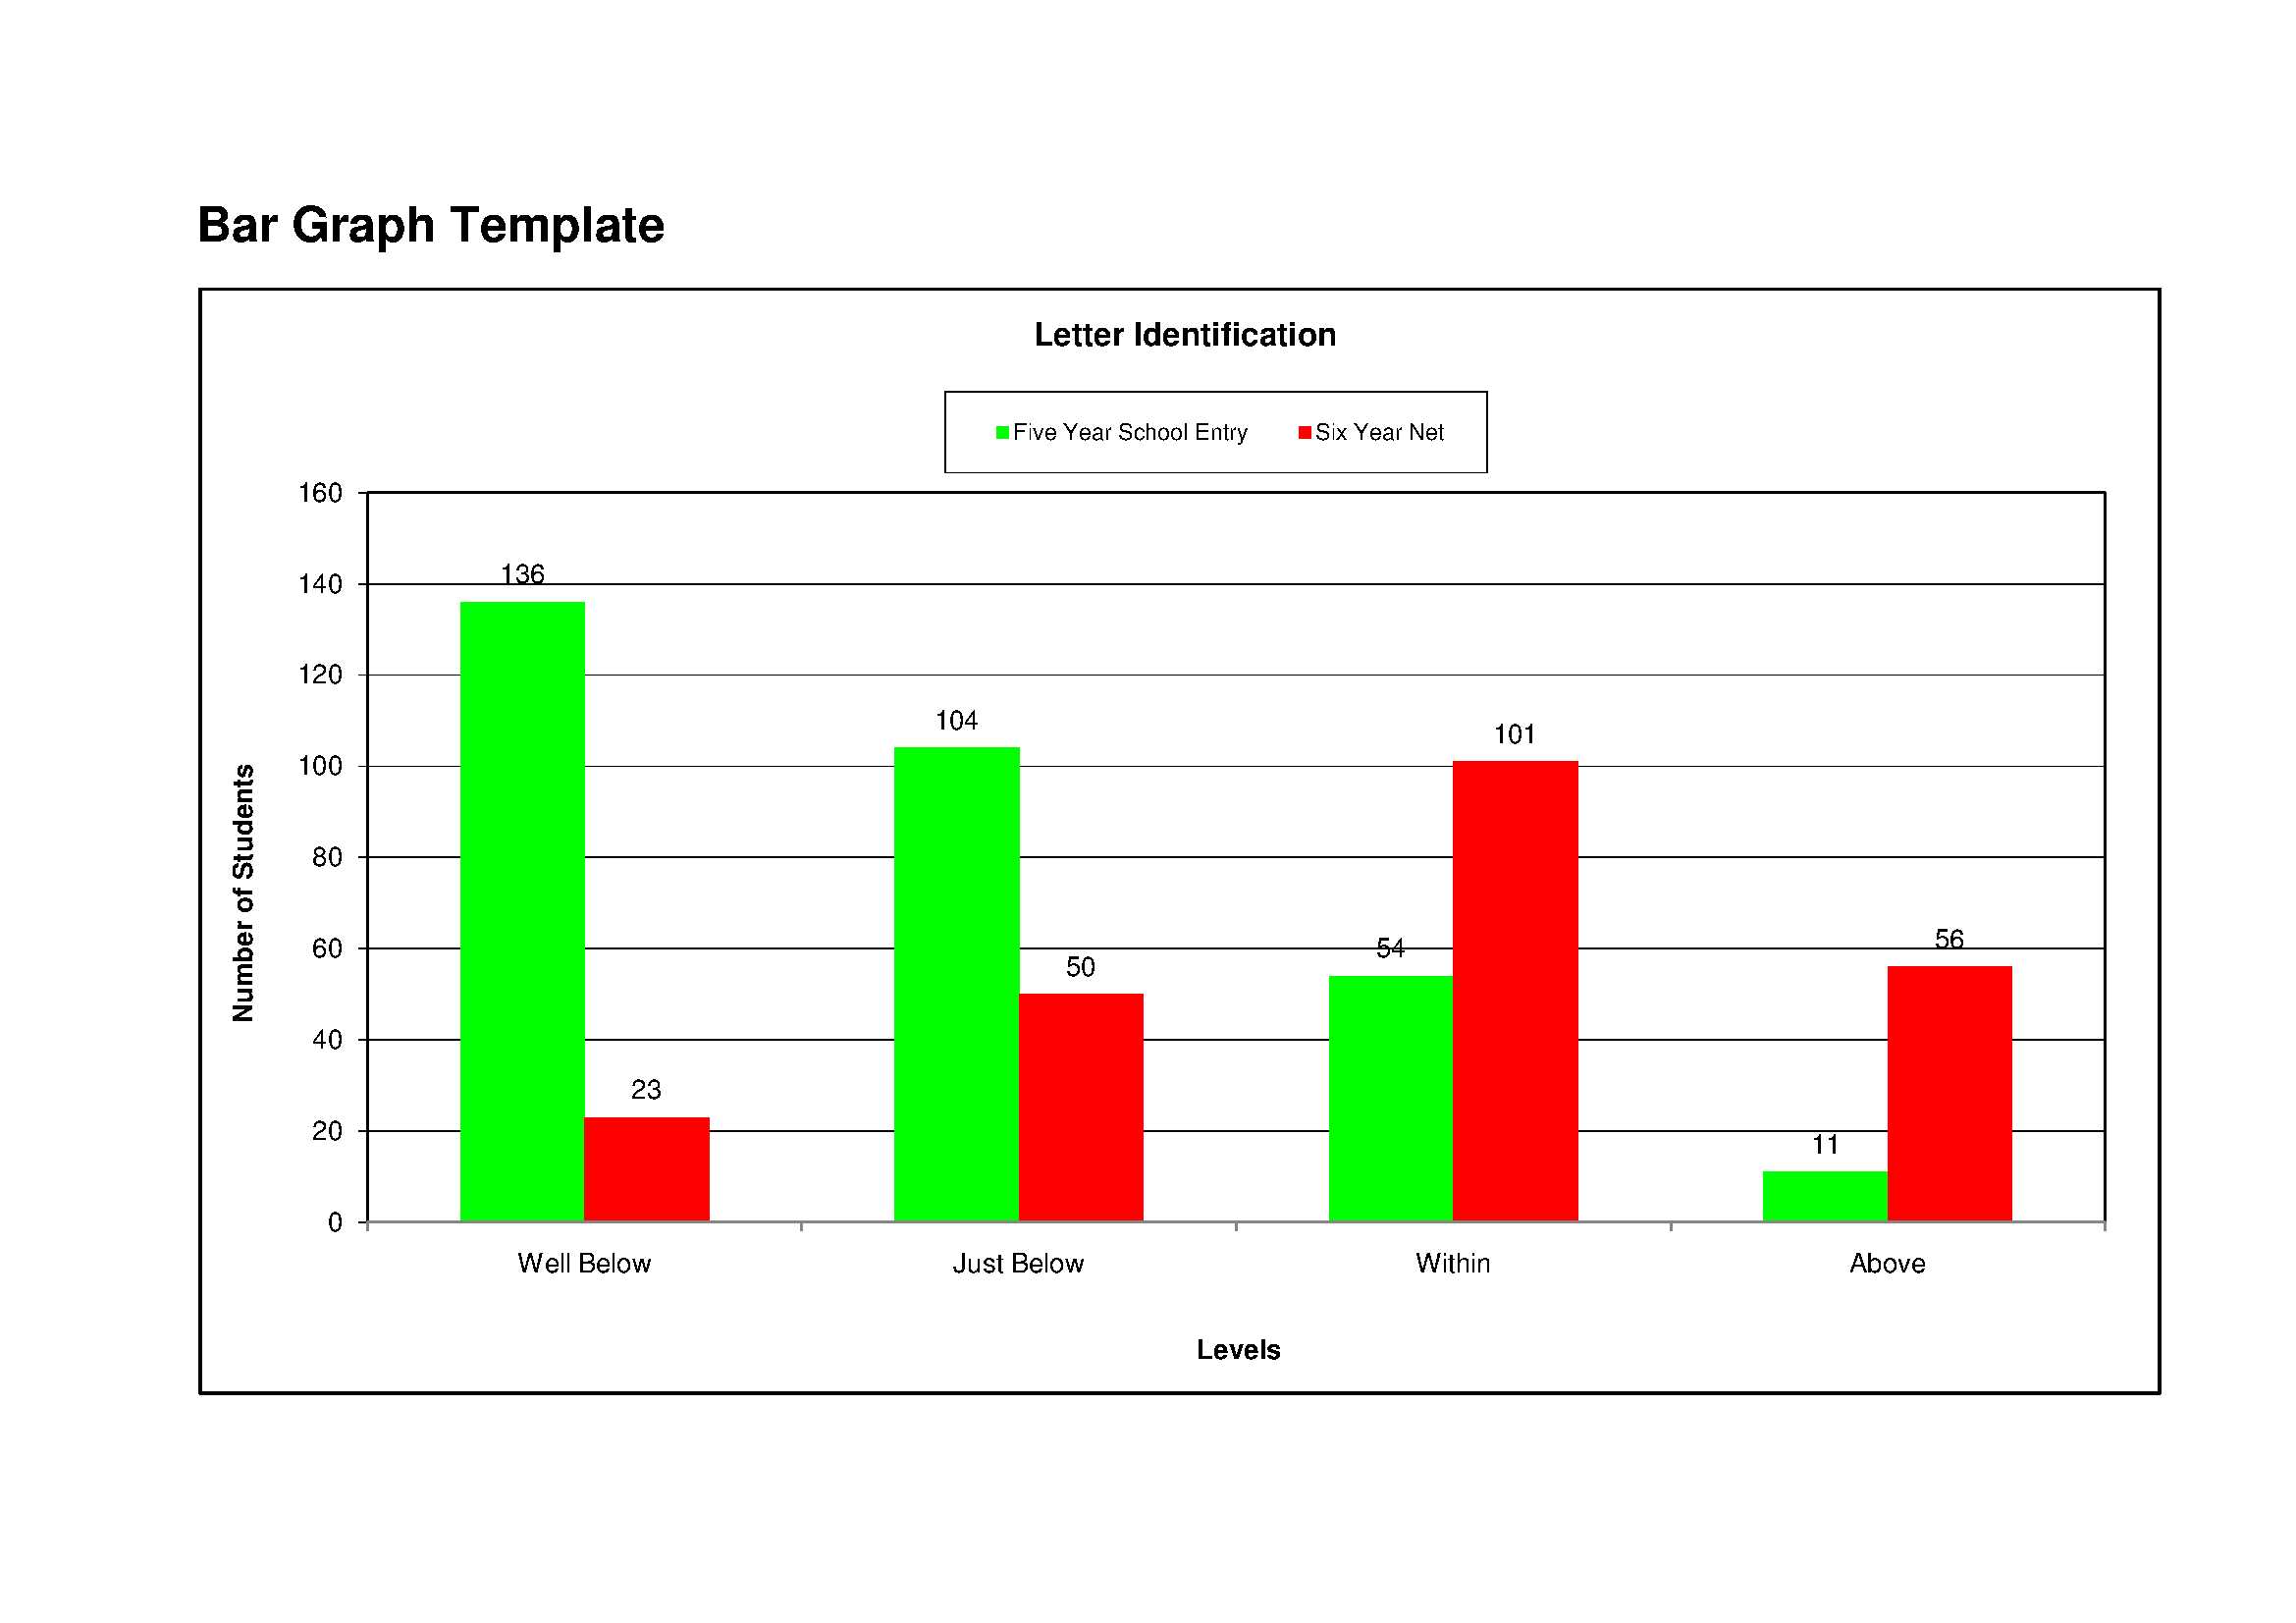 Data Handling Class 4 Bar Graph Free Table Bar Chart | Images and ...